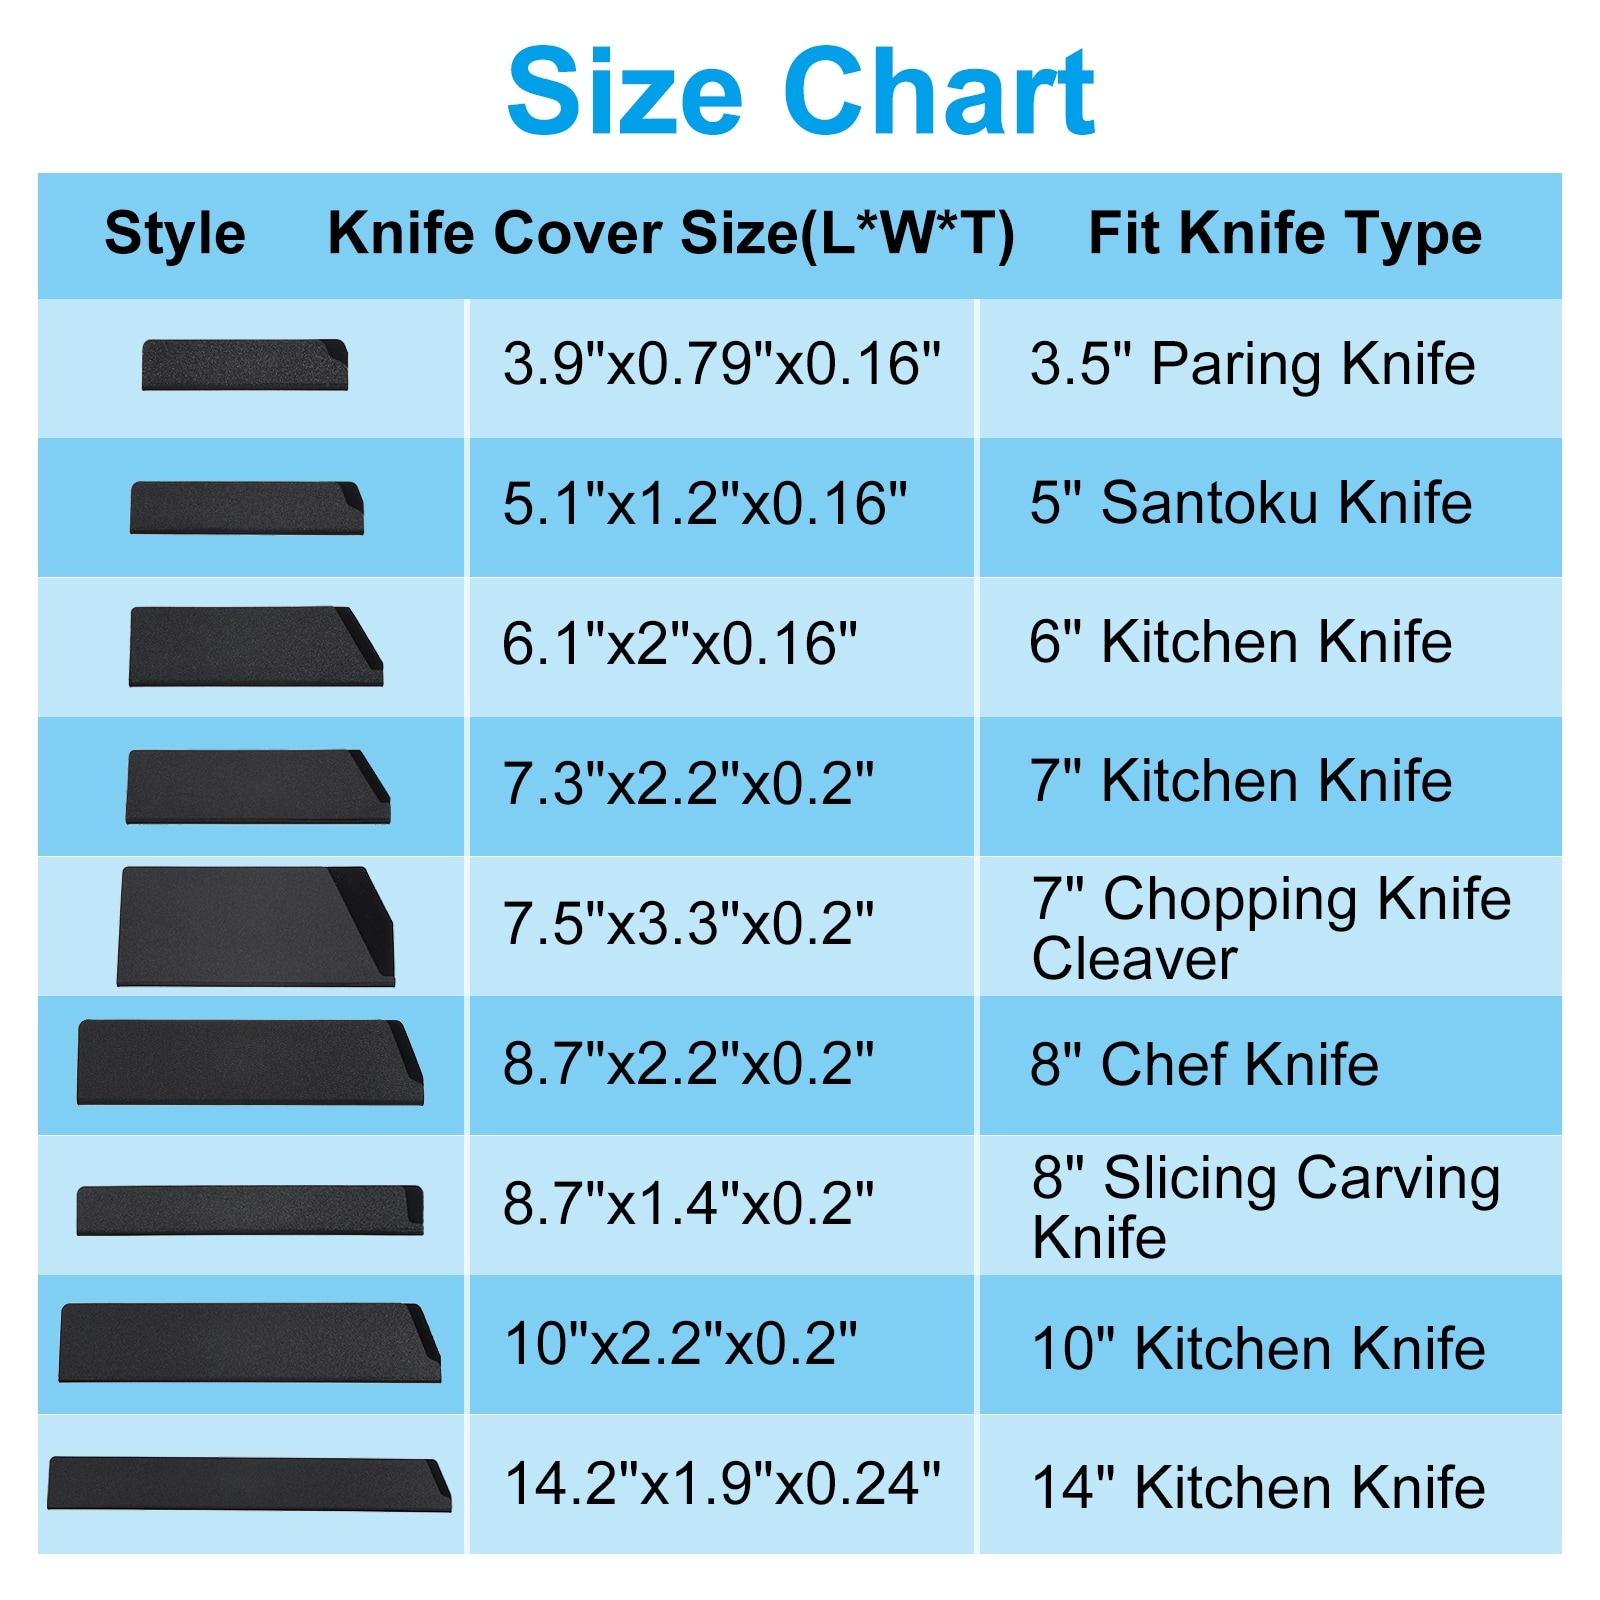 https://ak1.ostkcdn.com/images/products/is/images/direct/f82a46d57133d6d384fc5574d2ffe71e9fc67fa9/3Pcs-ABS-Kitchen-Knife-Sheath-Cover-Sleeves-for-8%22-Chef-Knife%2C-Black.jpg